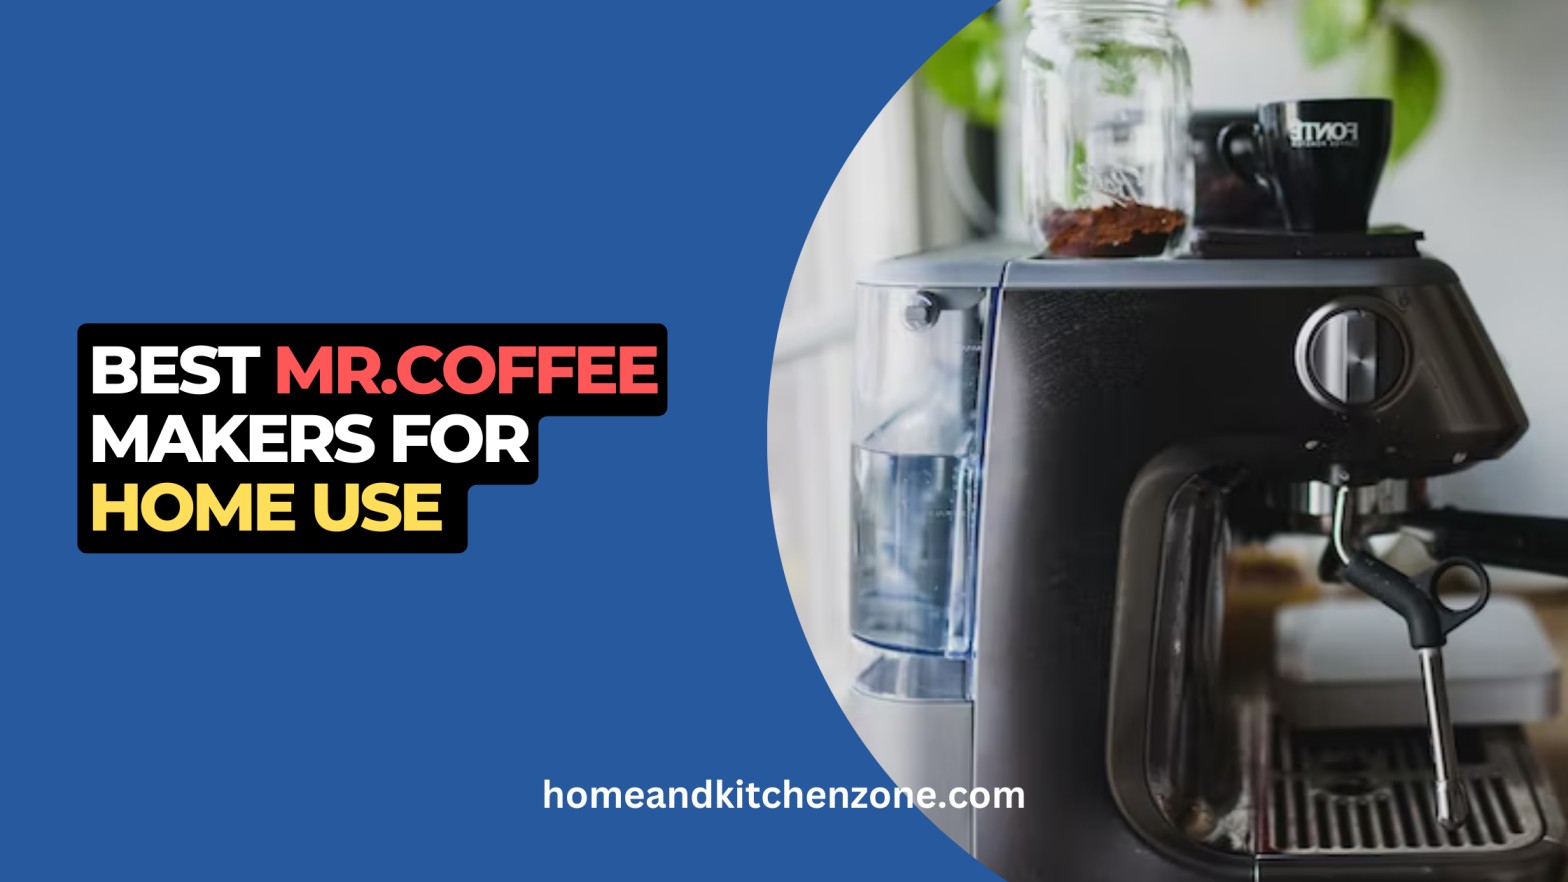 Best-Mr.-Coffee-Makers-For-Home-Use-